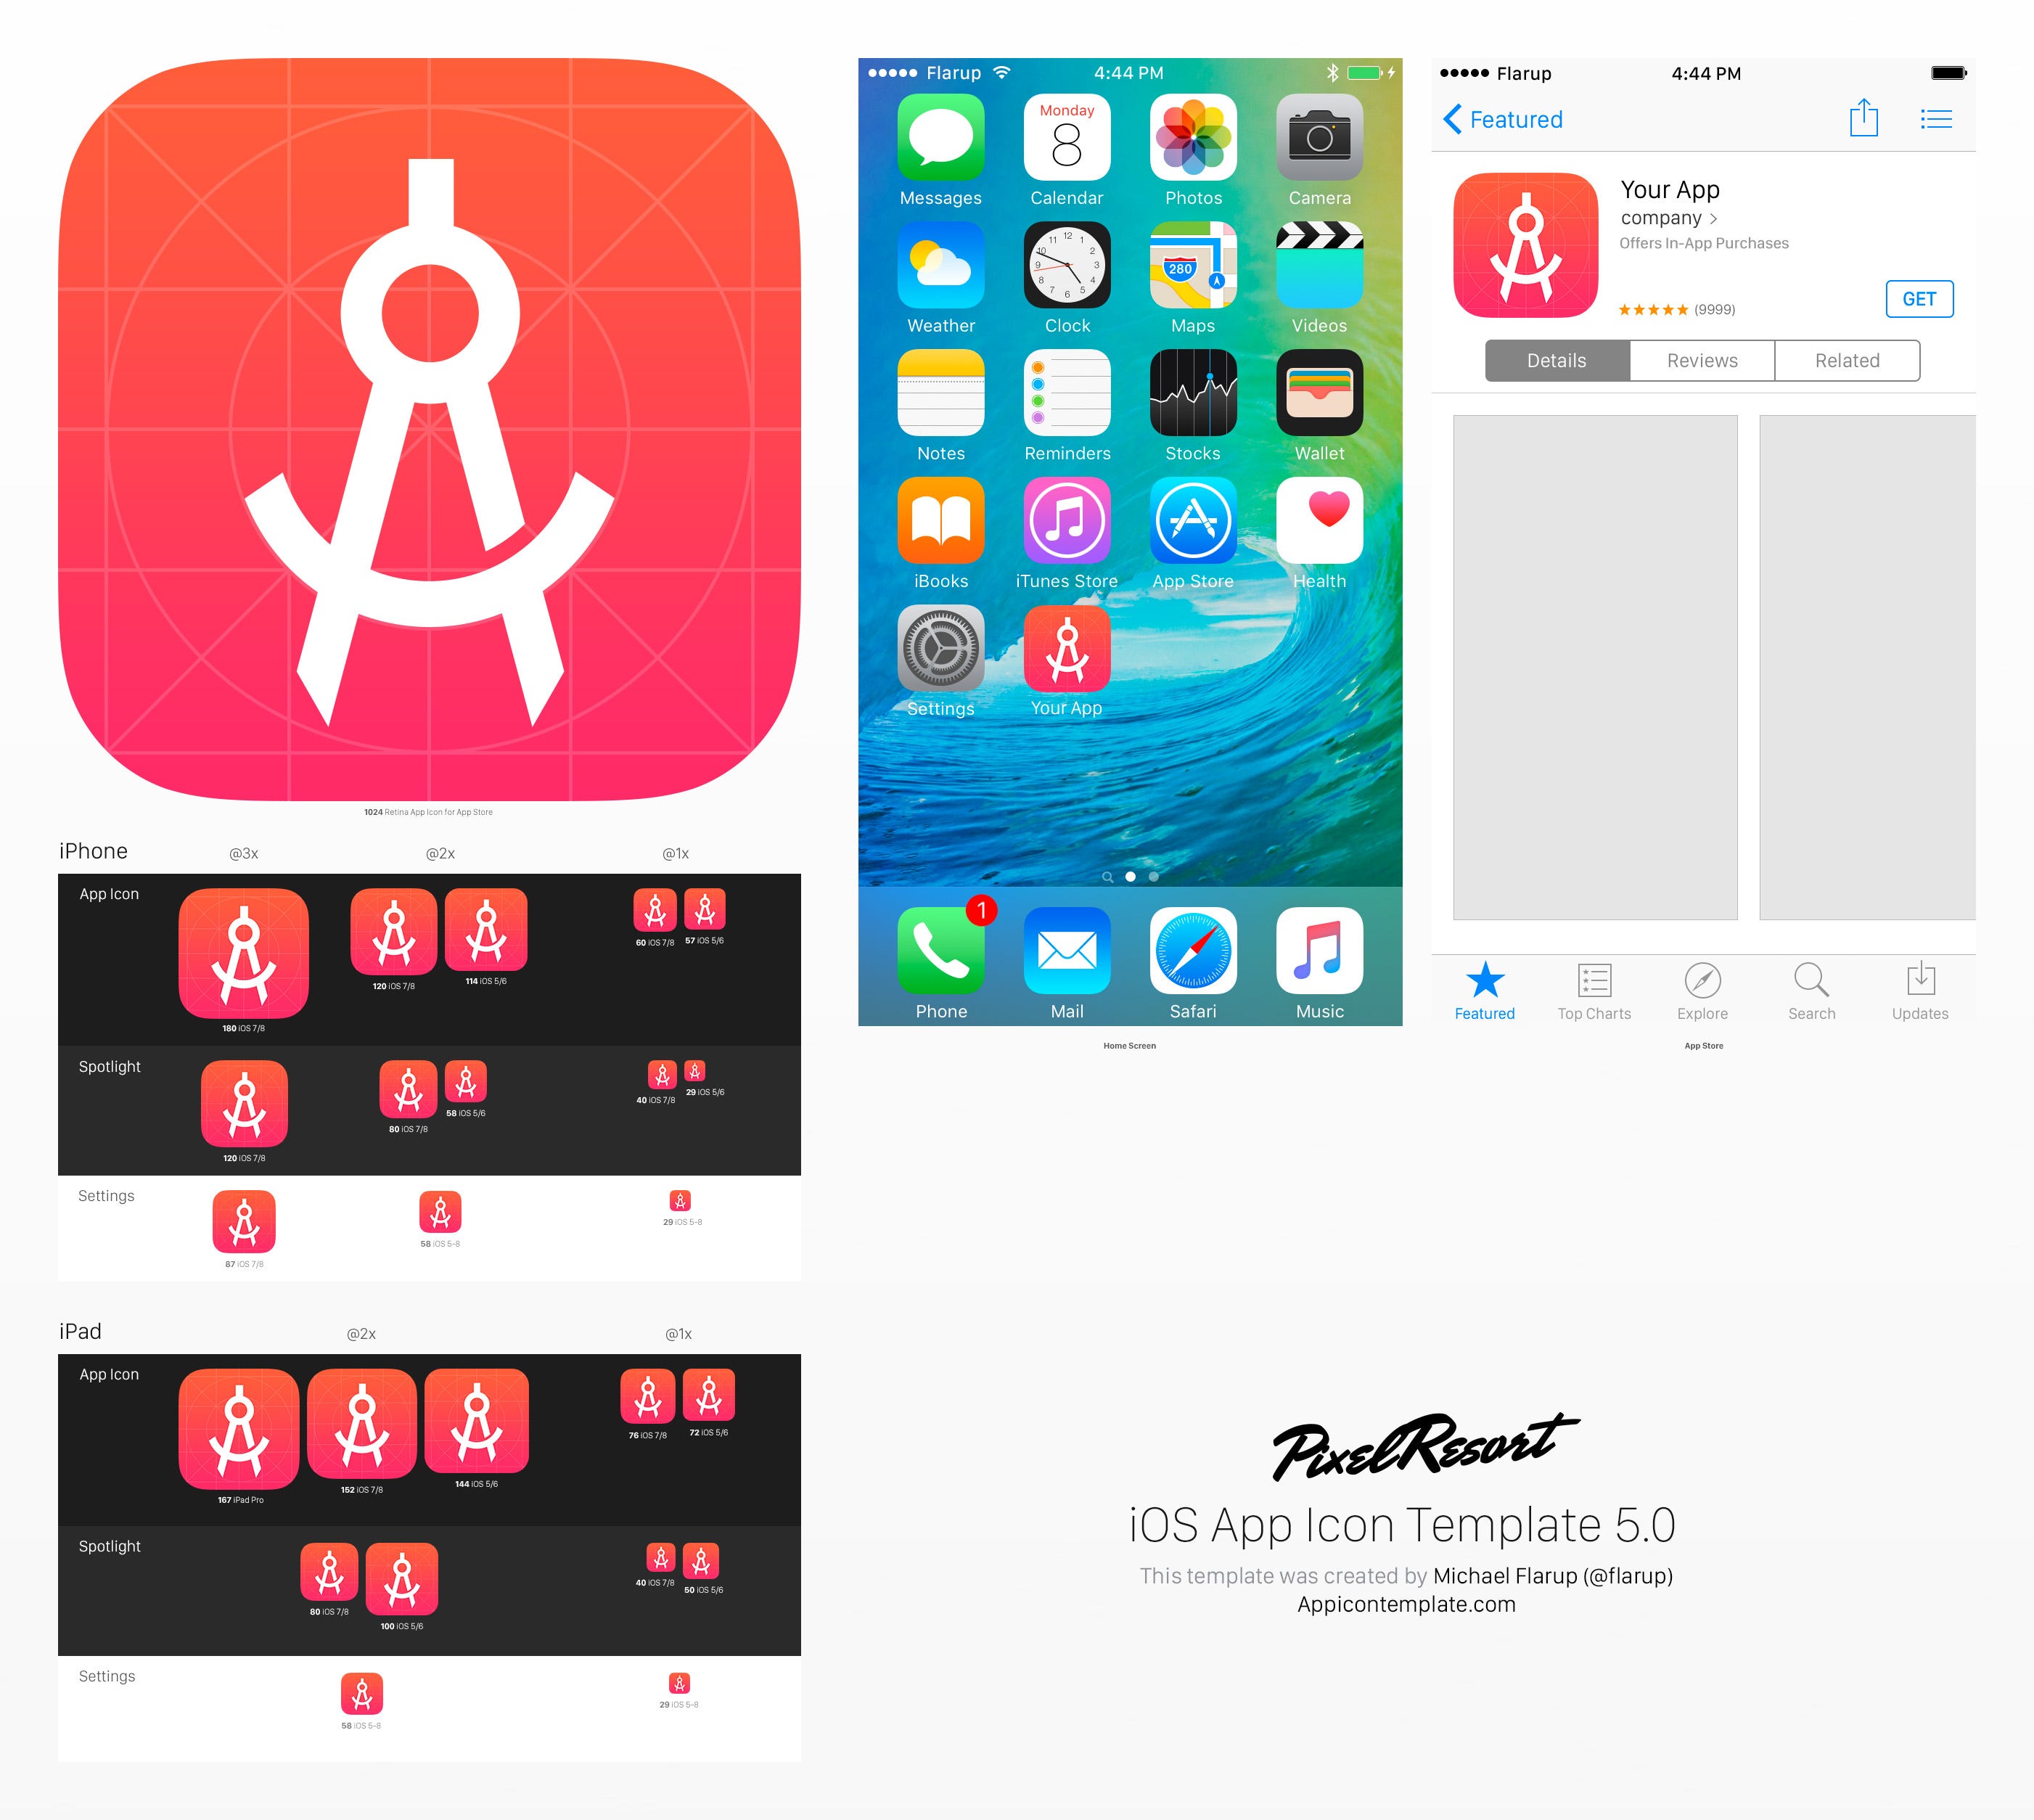 Thoughts On The New Official Apple App Icon Template By Michael Flarup The Startup Medium